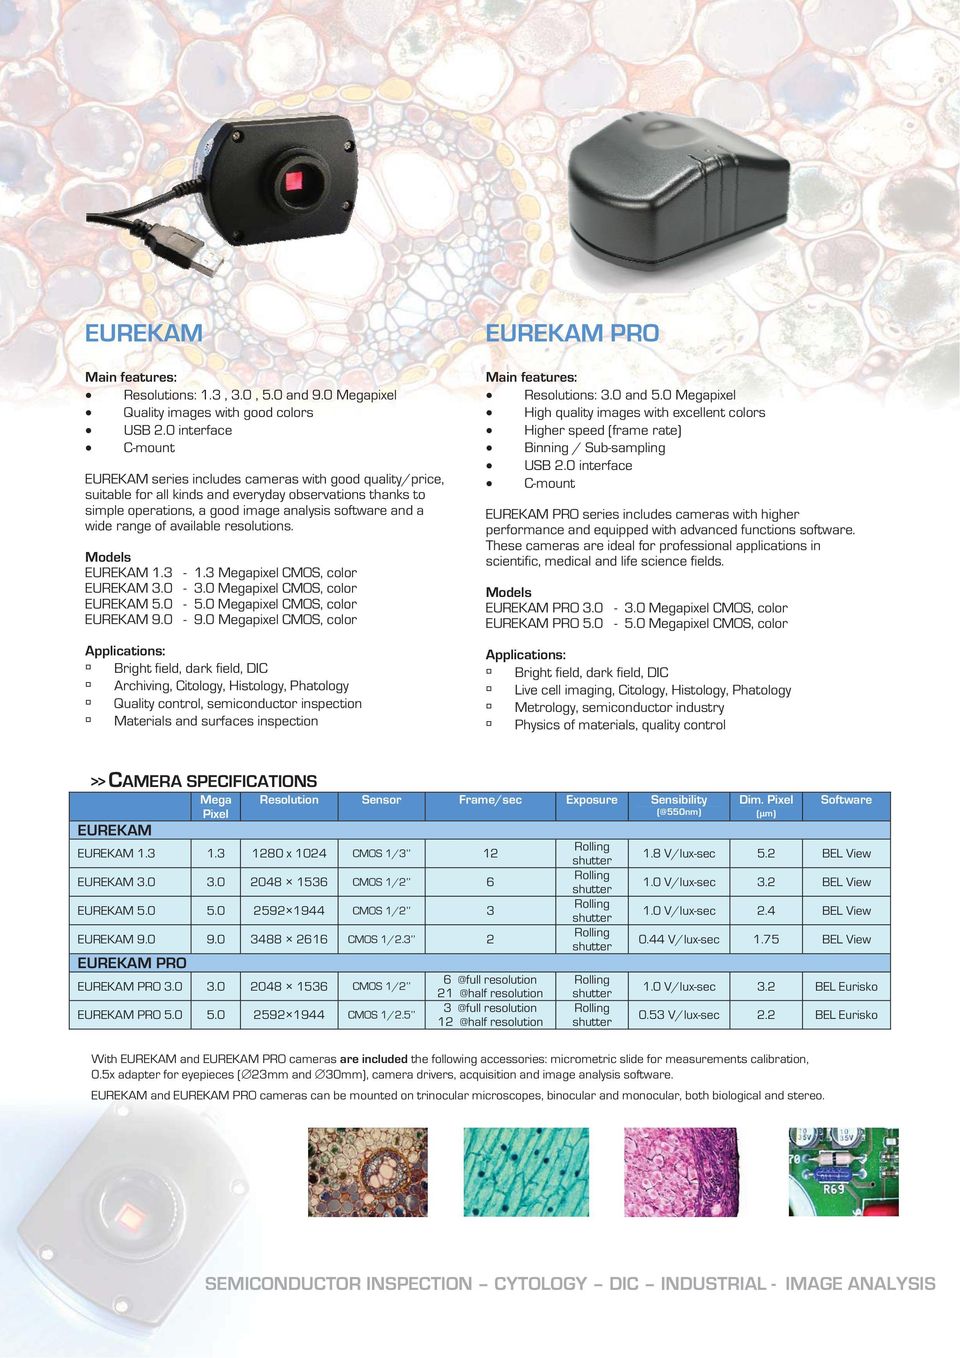 0 interface C-mount EUREKAM series includes cameras with good quality/price, suitable for all kinds and everyday observations thanks to simple operations, a good image analysis software and a wide